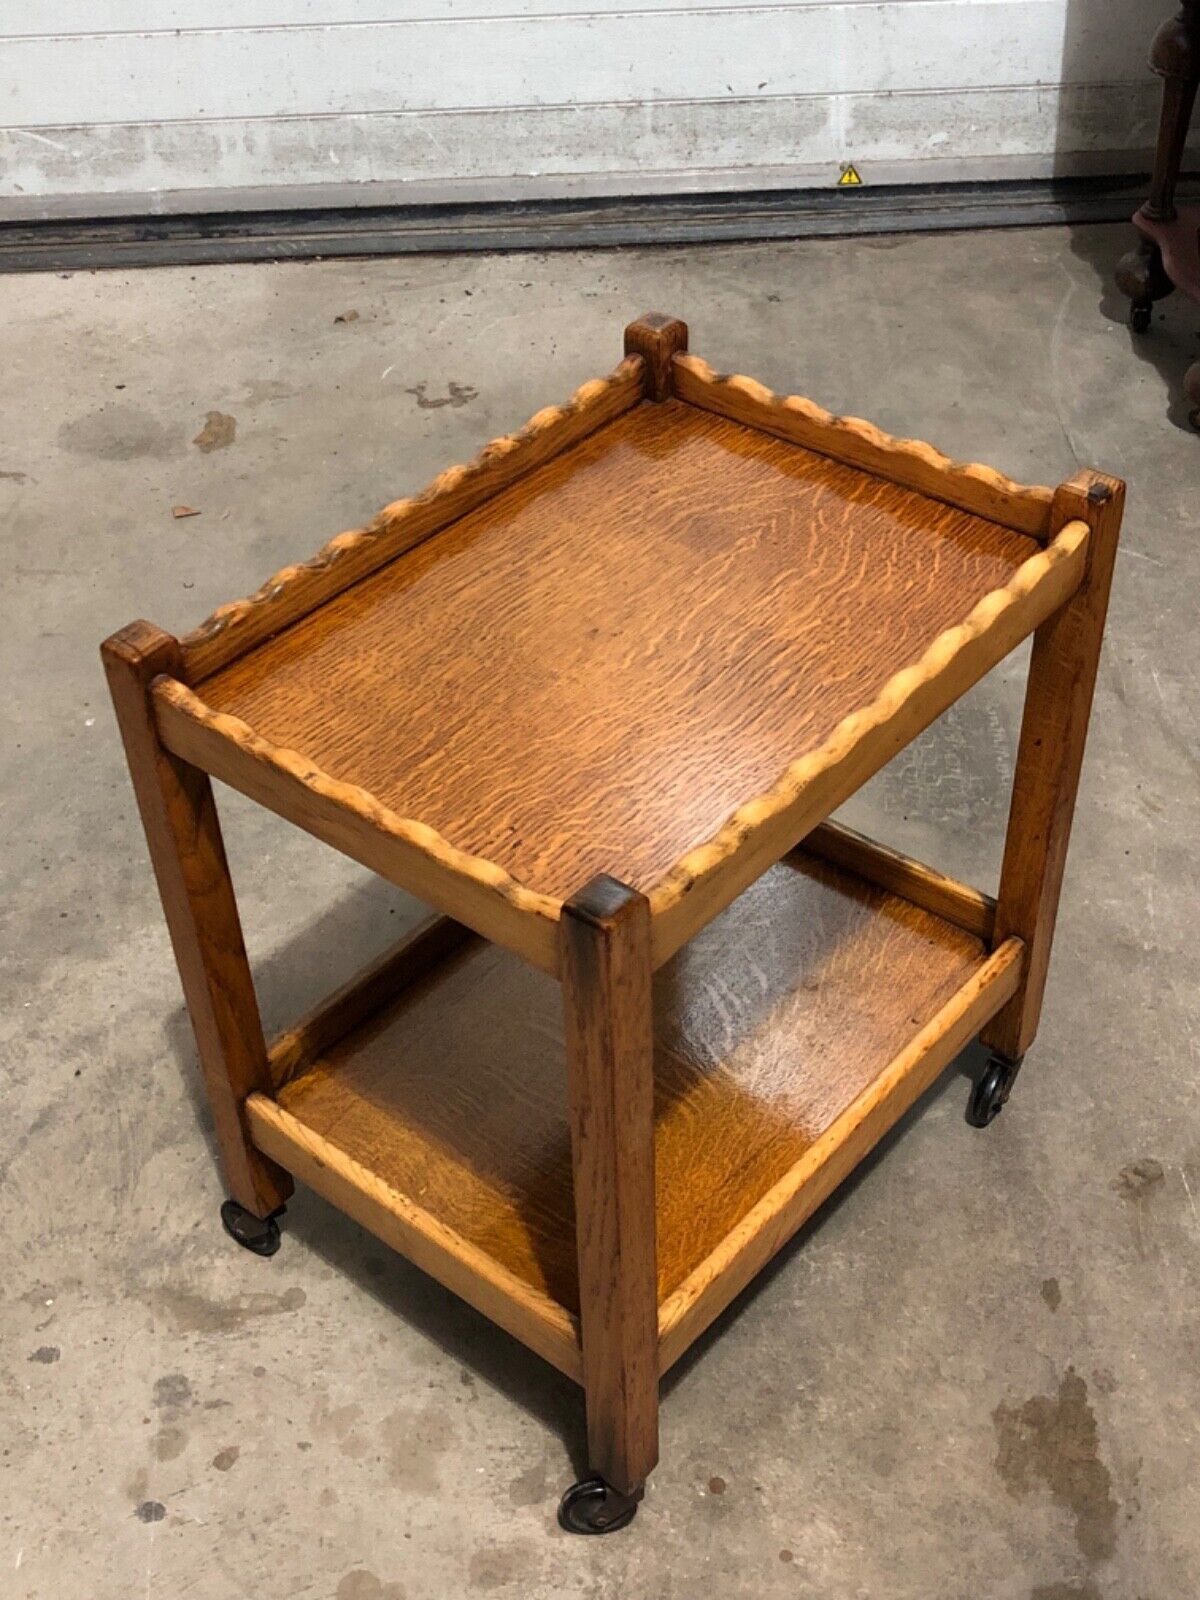 000784....Handsome Small Vintage Trolley / Side Table / Bedside Table